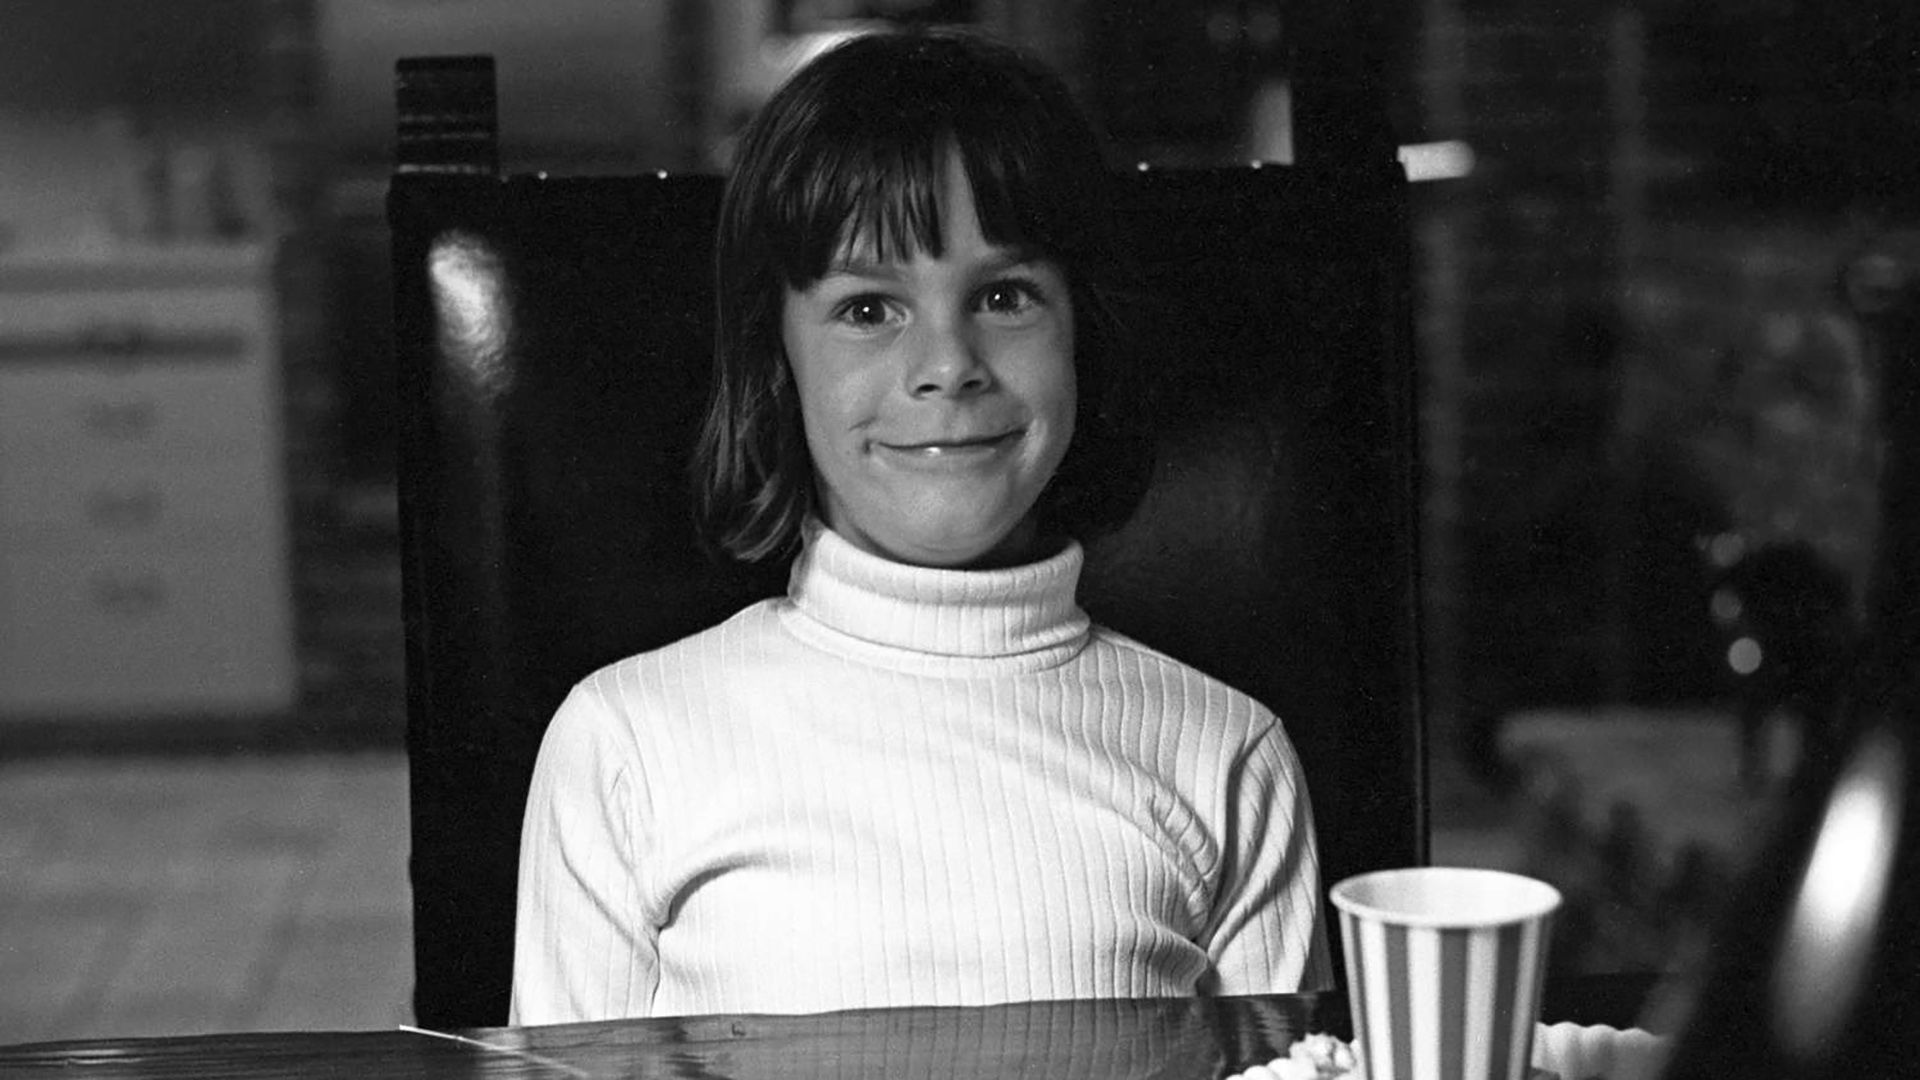 Jamie Lee Curtis as a child